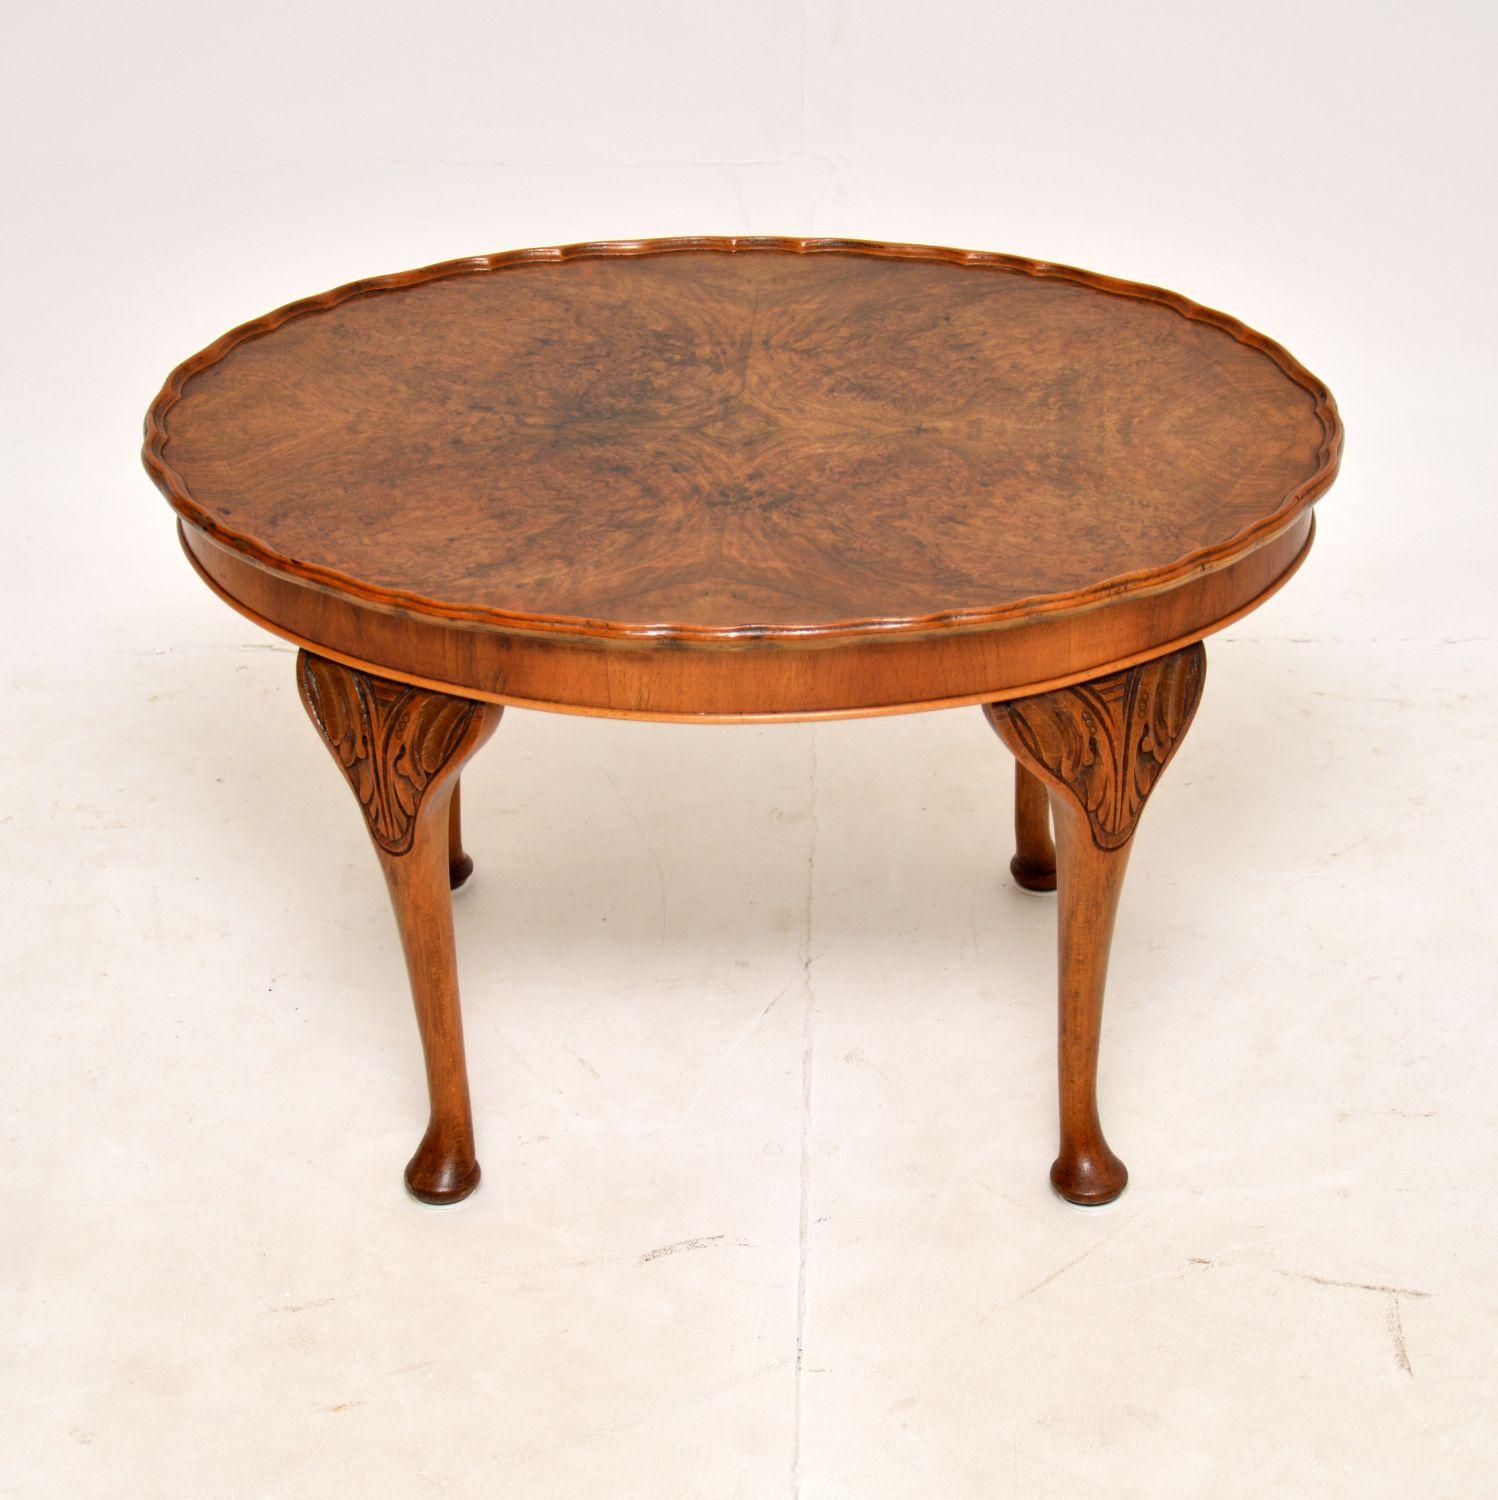 A gorgeous antique walnut oval coffee table with a raised pie crust edge. This was made in England, it dates from around the 1930’s.

It is a lovely size and is of great quality. The top has stunning burr walnut grain patterns, this sits on cabriole